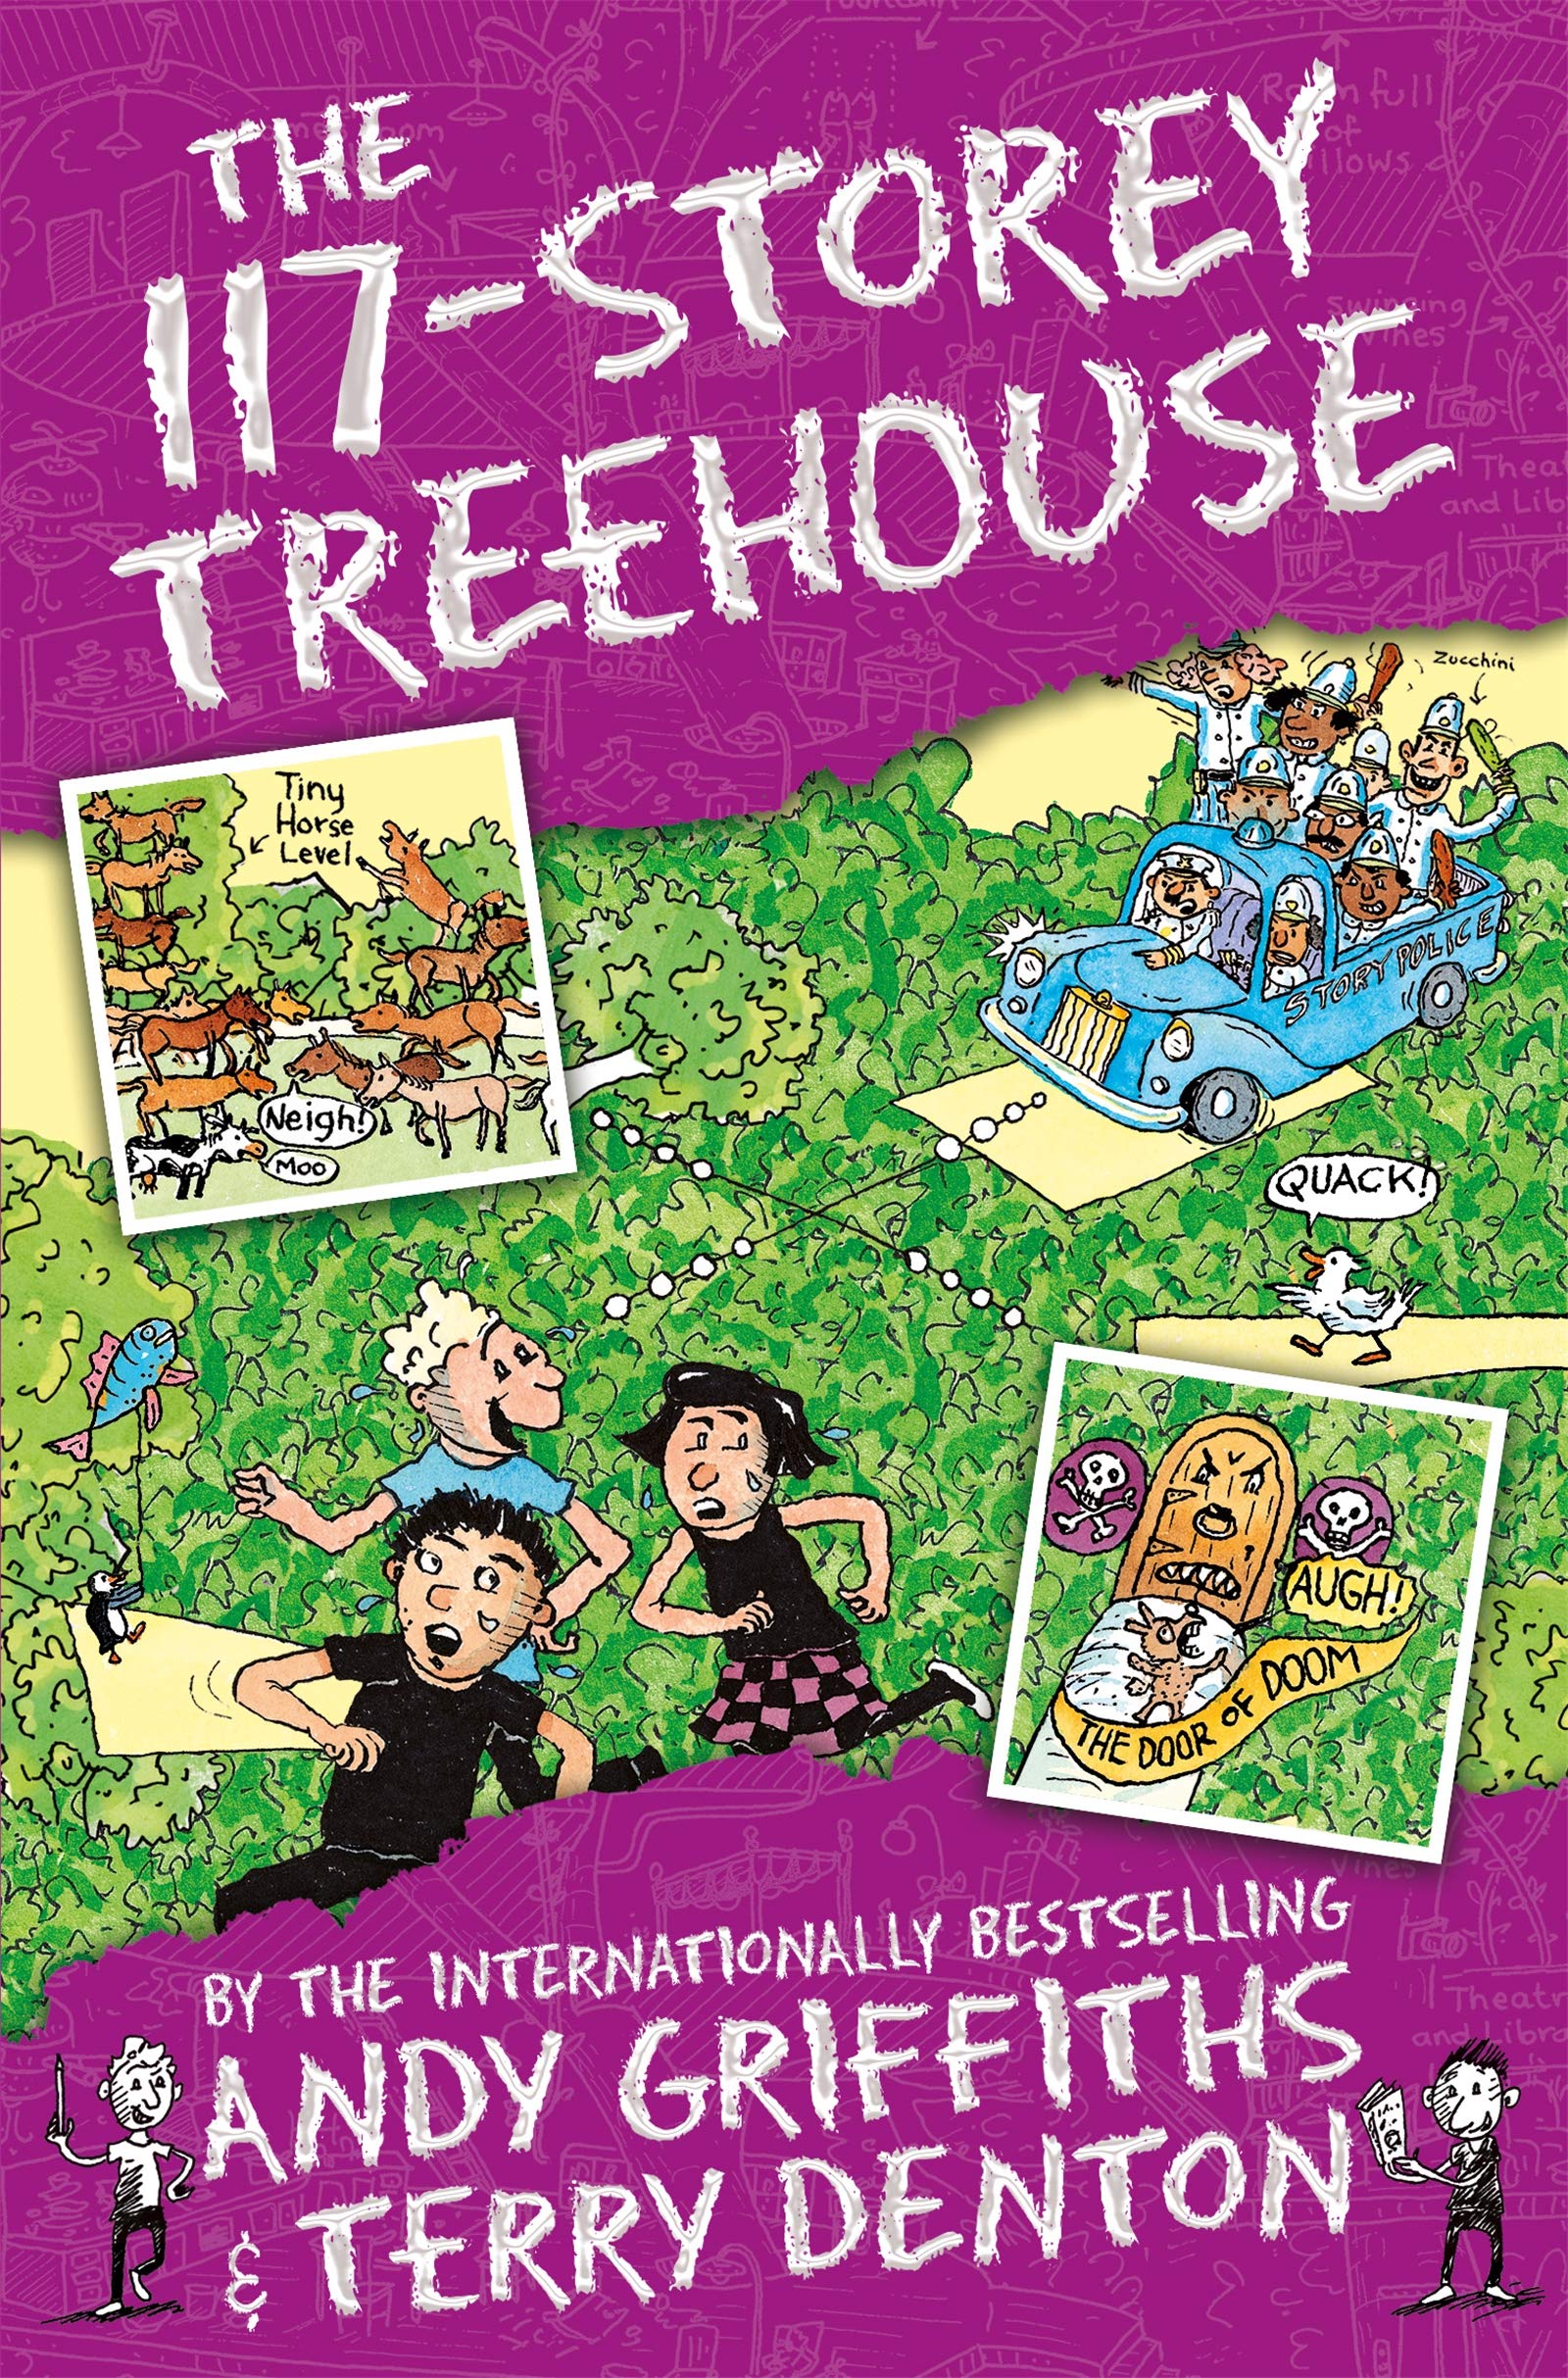 117-Storey Treehouse | Andy Griffiths